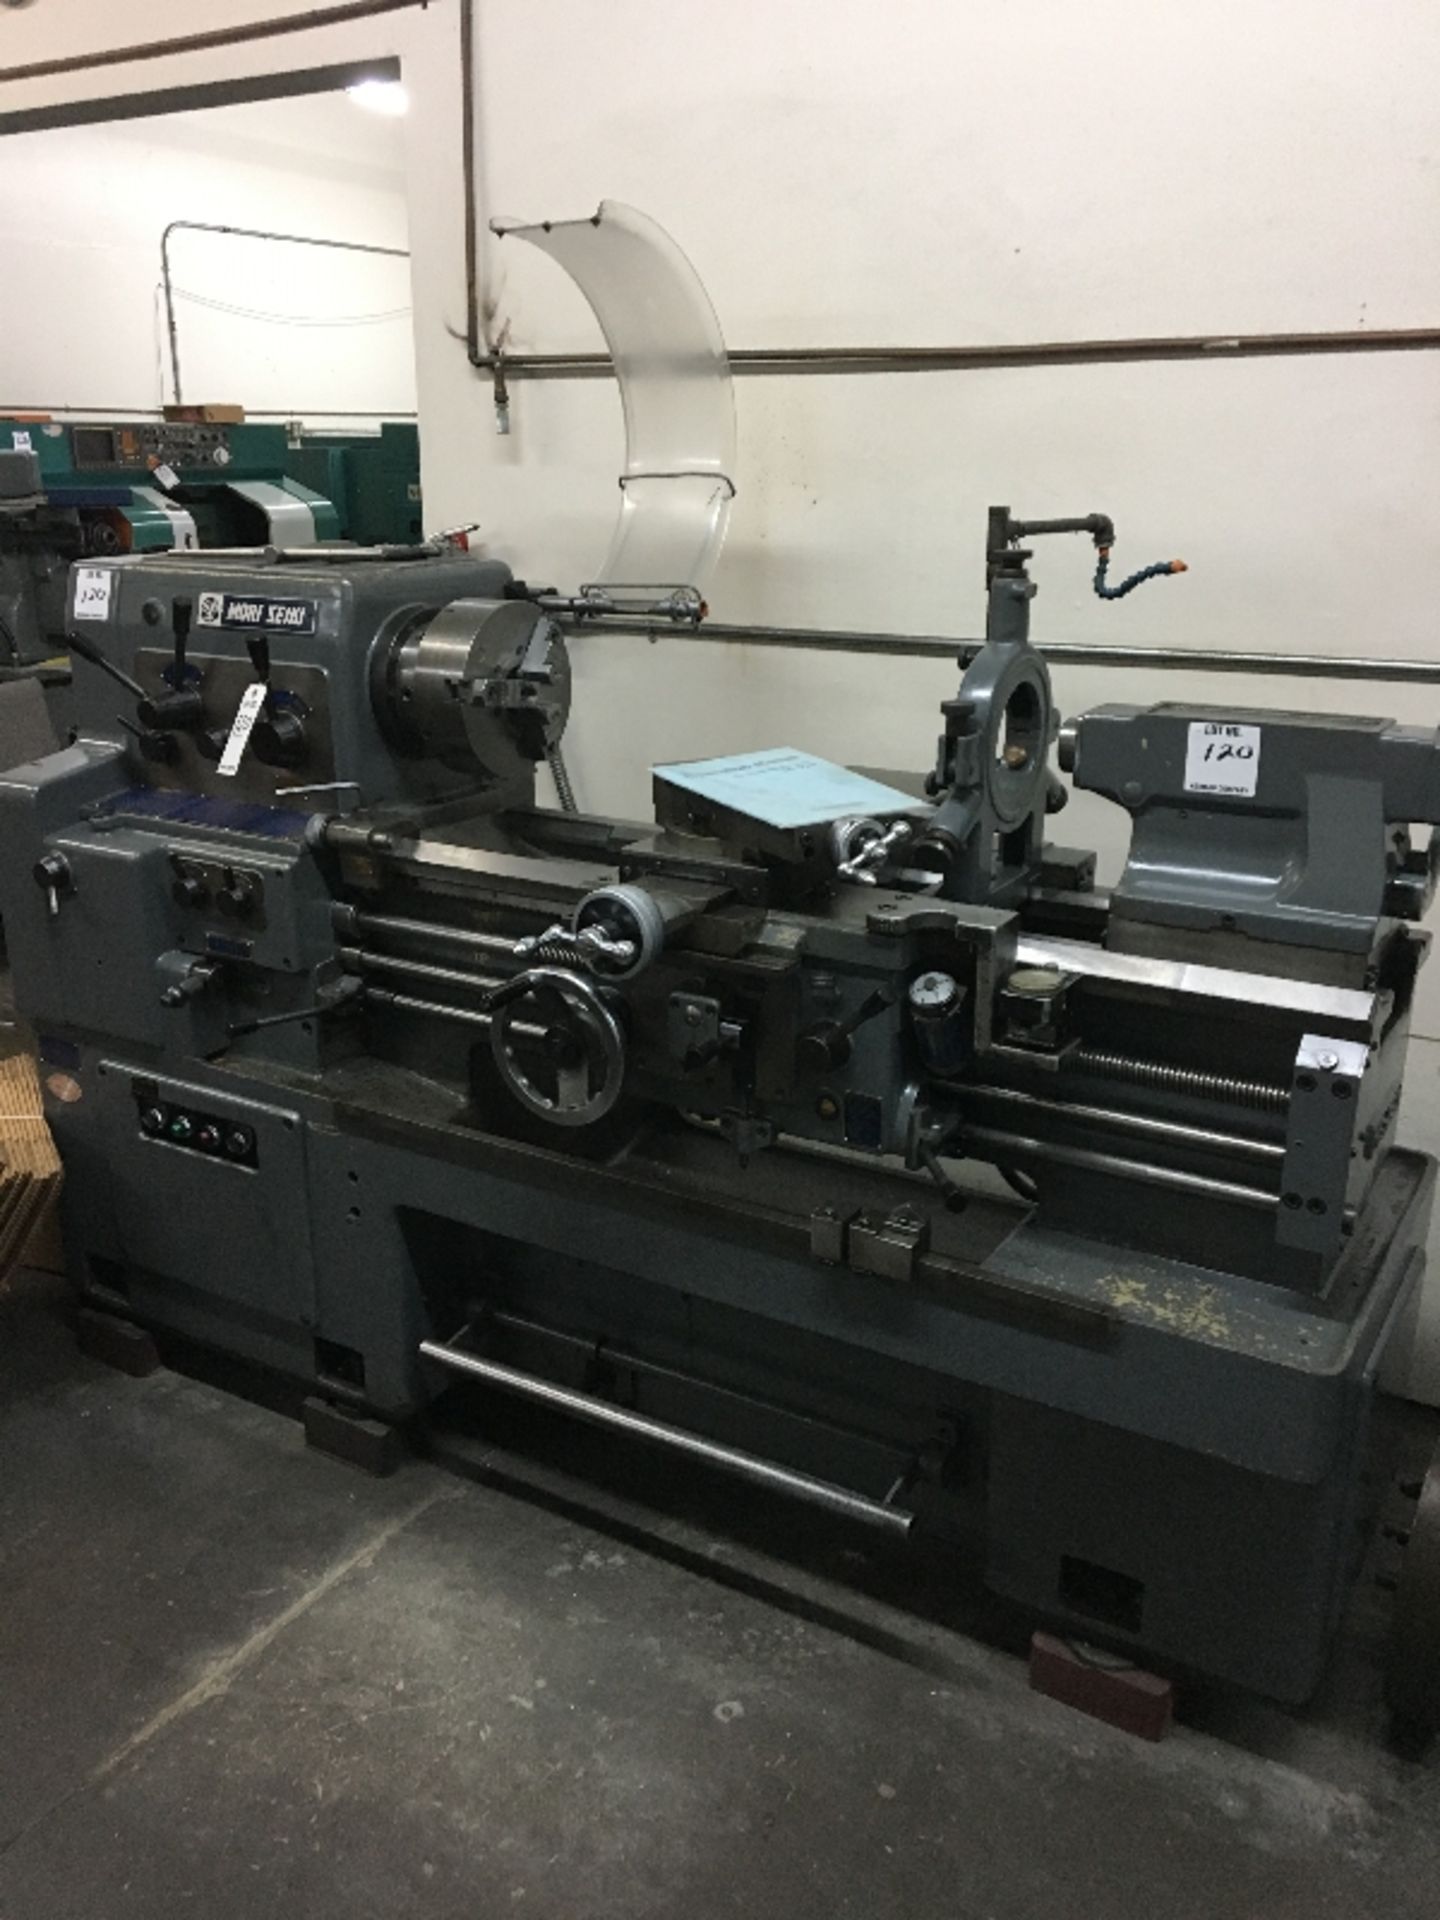 MORI SEIKI MS-850 LATHE - 32-1,800 RPM VARIABLE SPEED, STEADY REST, TAIL STOCK, 10'' 3 JAW CHUCK,